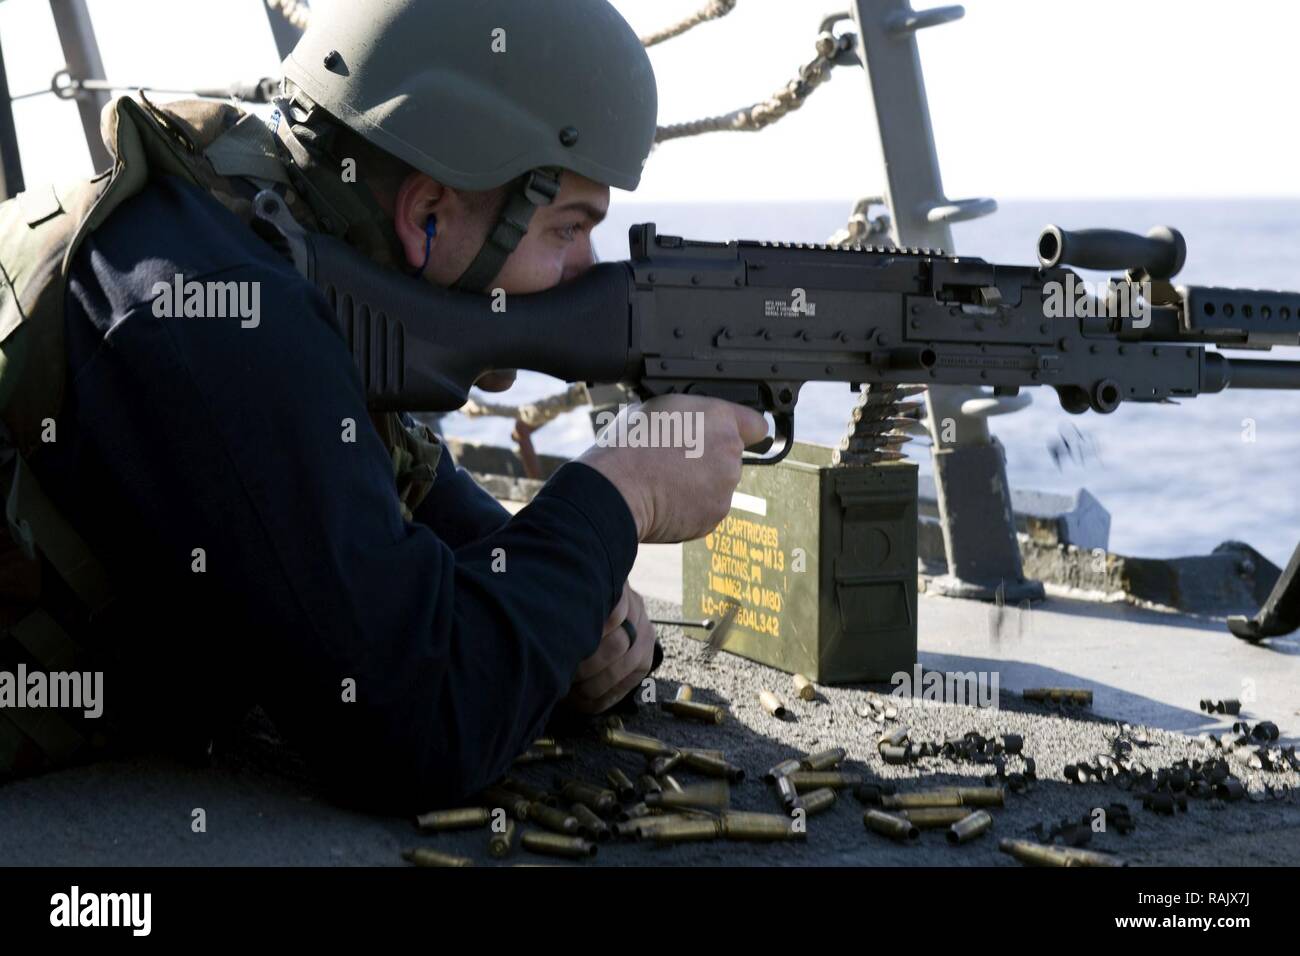 MEDITERRANEAN SEA (Feb. 8, 2017) Logistics Specialist 2nd Class Stephen Lowe fires a .50-caliber machine gun during a live-fire exercise aboard the guided-missile destroyer USS Truxtun (DDG 103). Truxtun, part of the George H.W. Bush Strike Group, is conducting naval operations in the U.S. 6th Fleet area of operations in support of U.S. national security interests in Europe. Stock Photo